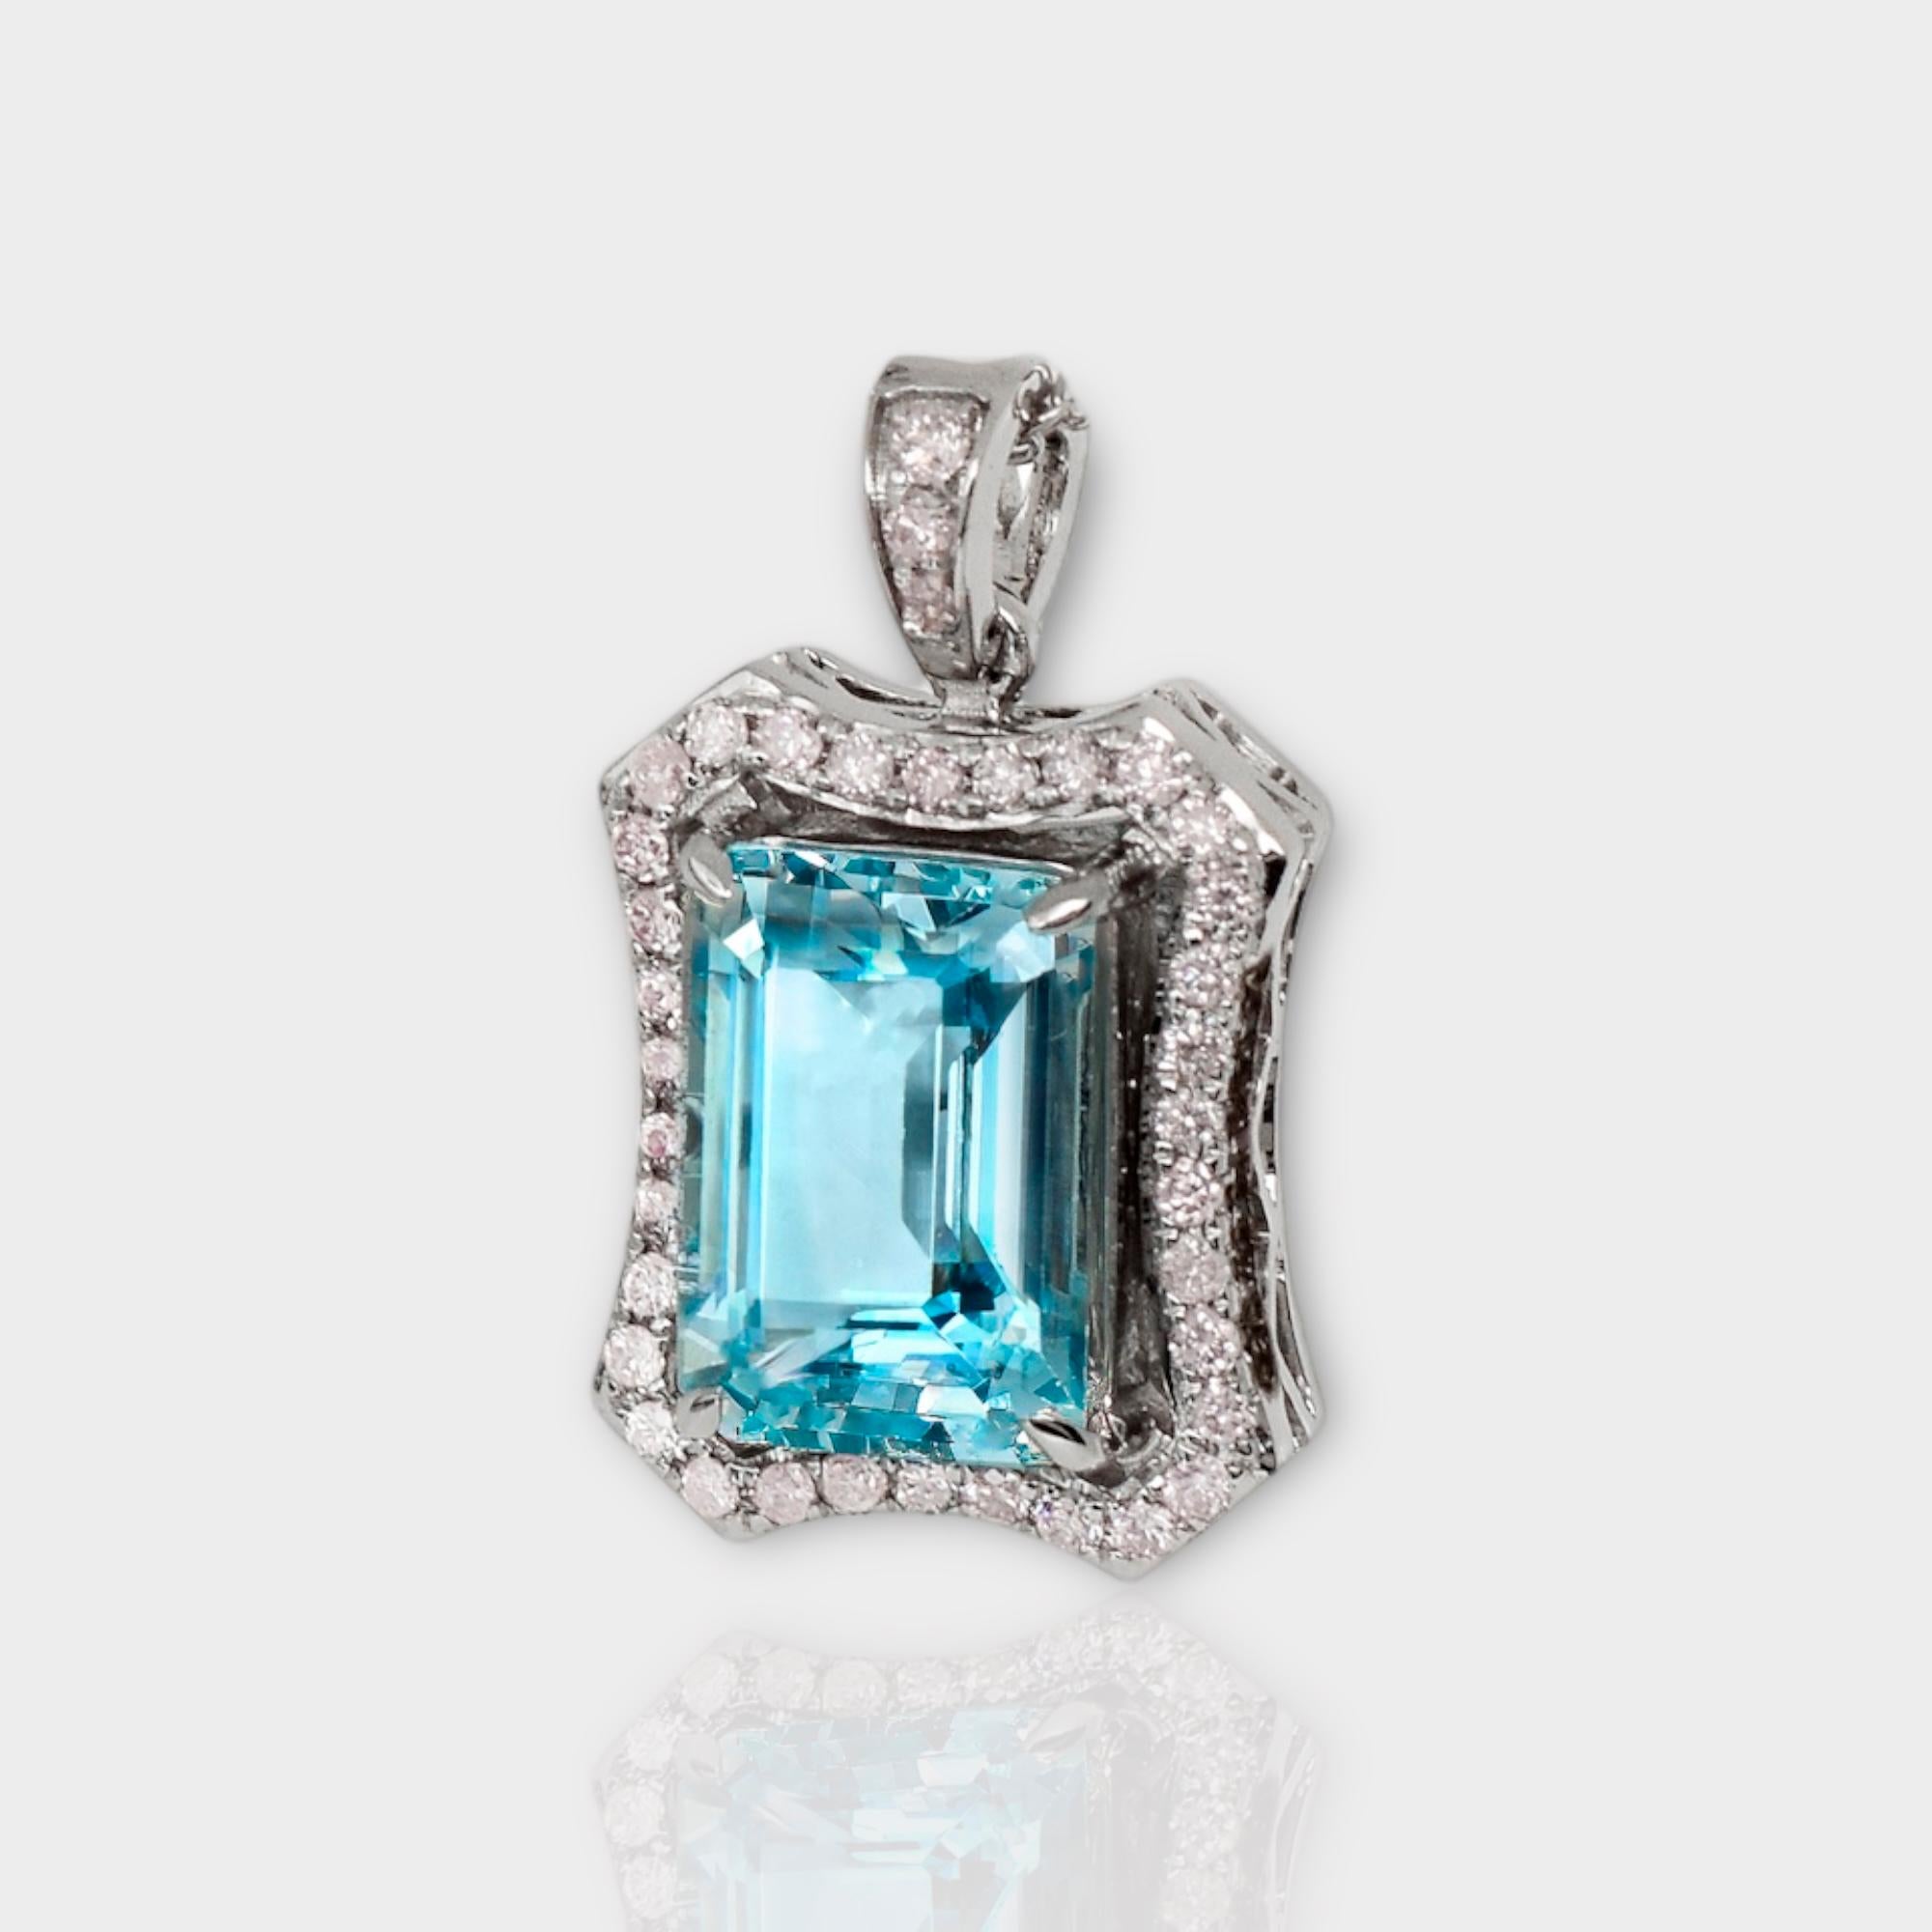 IGI 14K 2.21 Ct Aquamarine&Pink Diamonds Pendant Necklace In New Condition For Sale In Kaohsiung City, TW